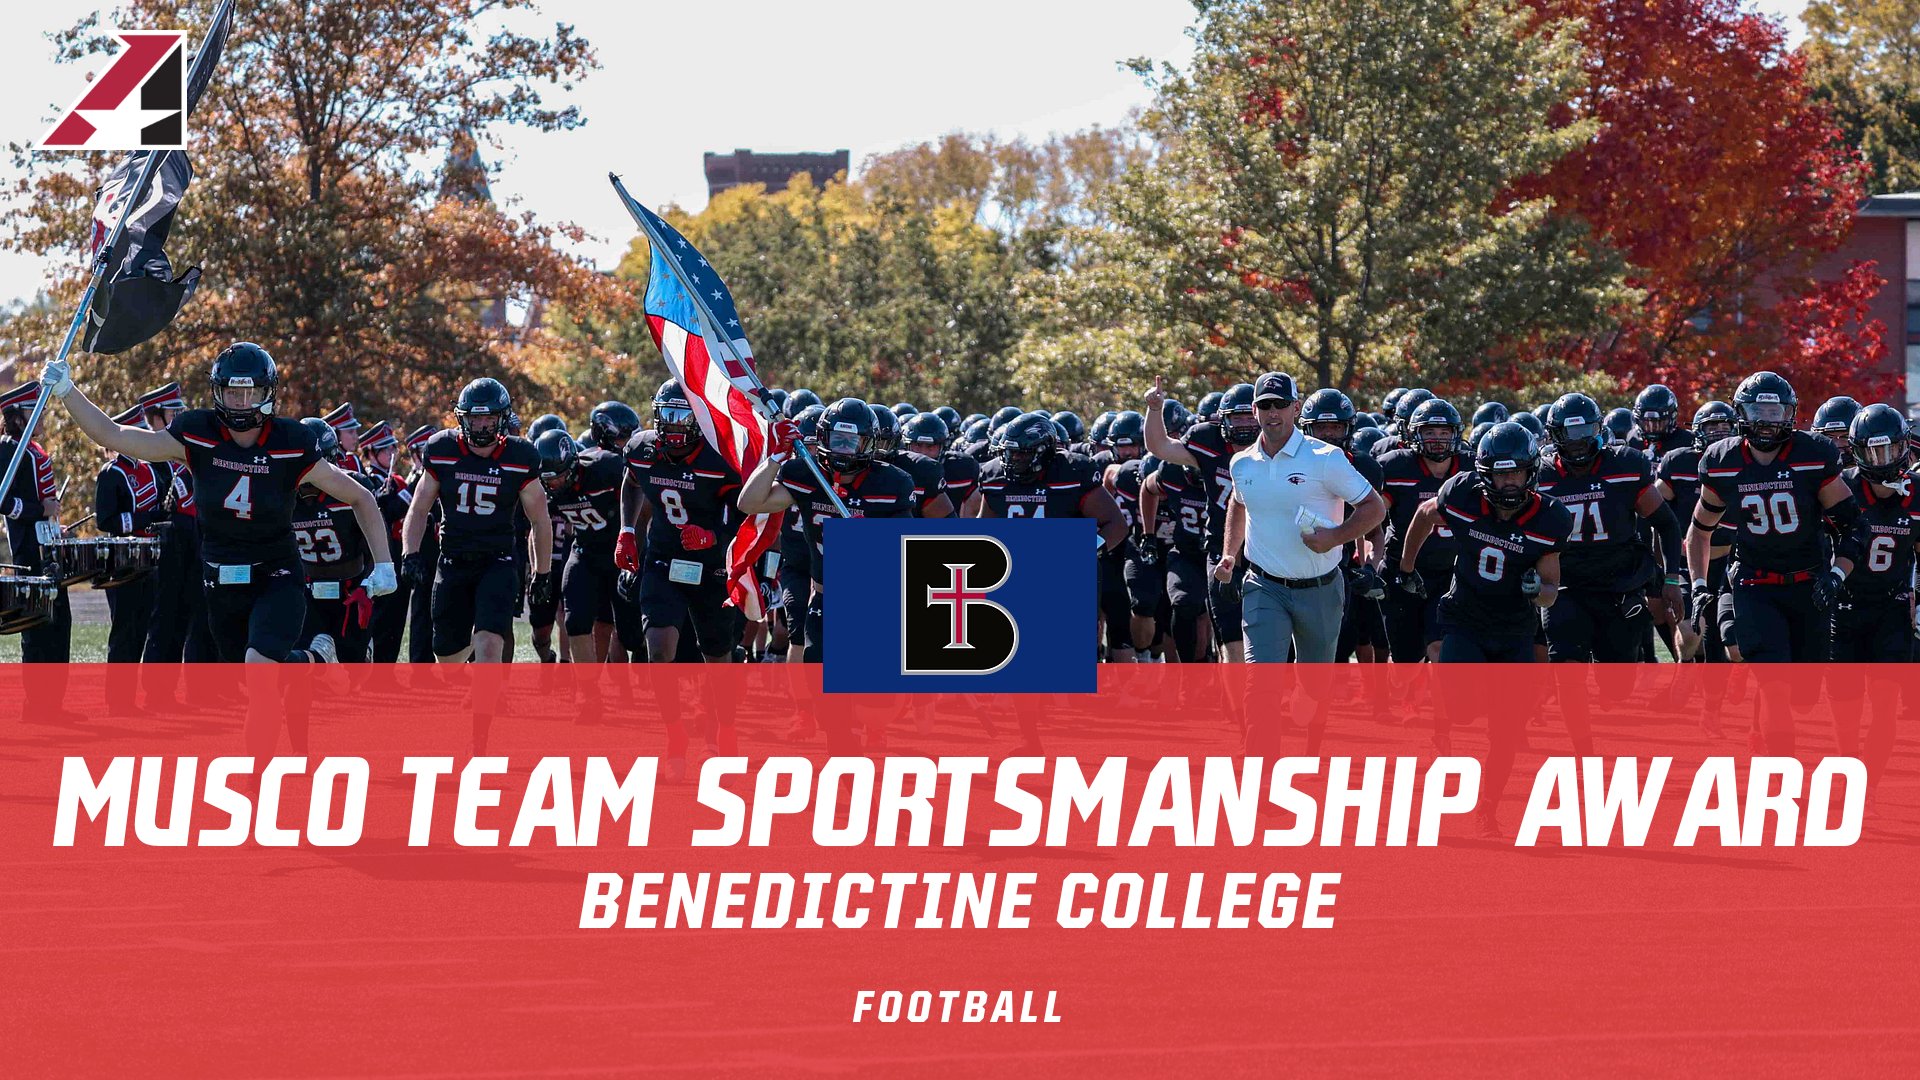 For the Second-Straight Year, Benedictine College Earns Musco Team Sportsmanship Award